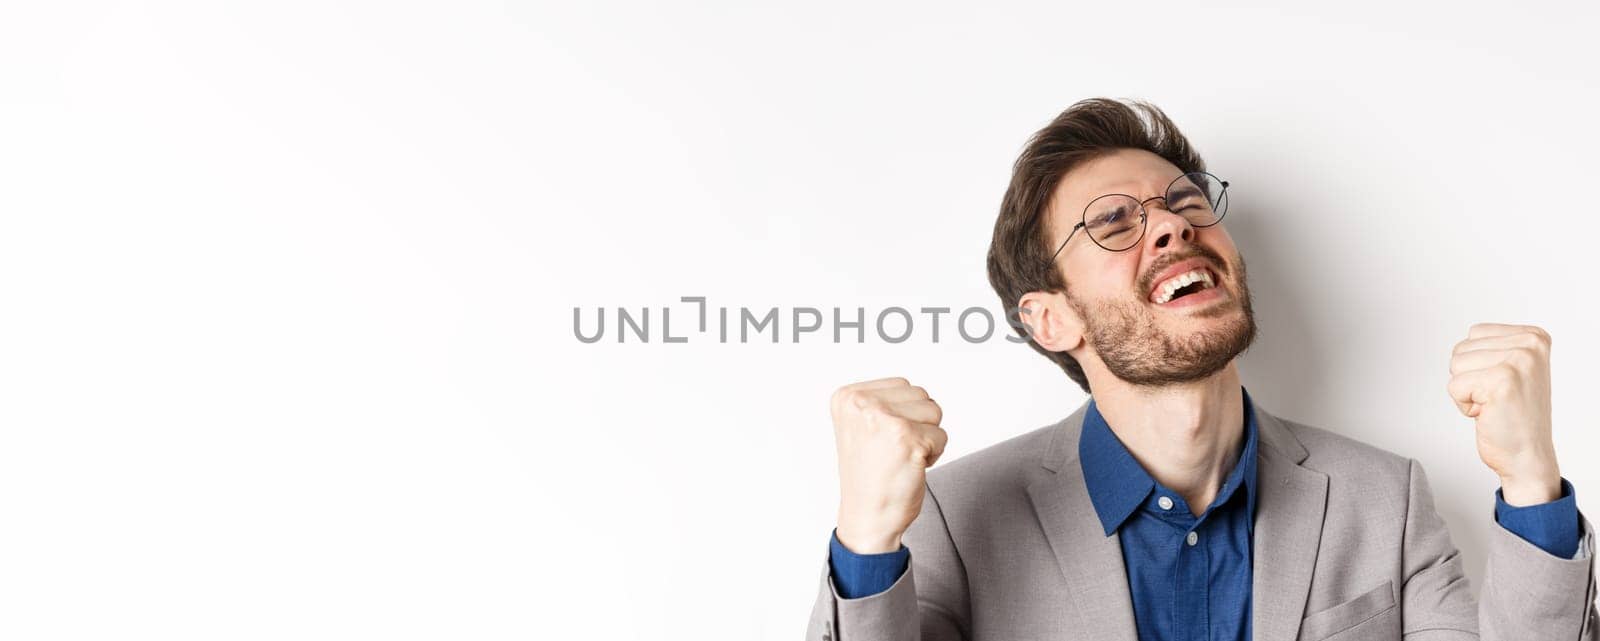 Excited businessman in glasses and suit shouting yes with pleasure and relieved face, shaking fists up, triumphing, winning bet, standing on white background.